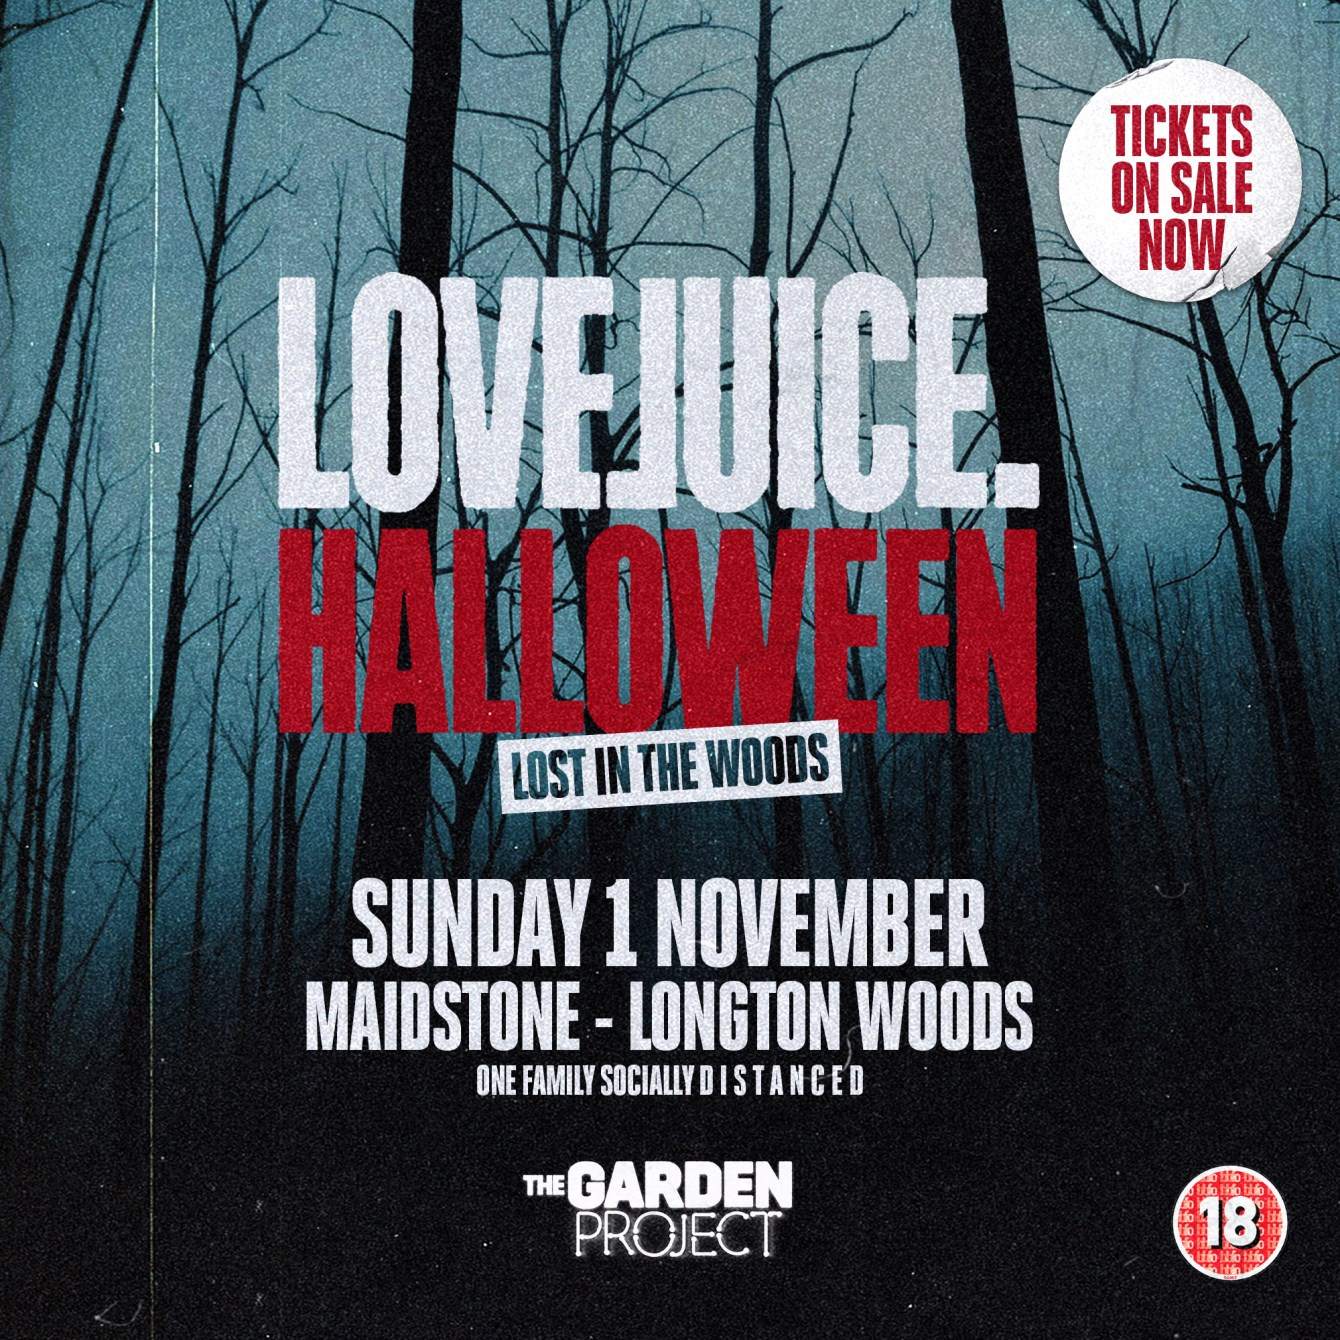 LoveJuice Halloween Kent - Lost In The Woods - Página trasera